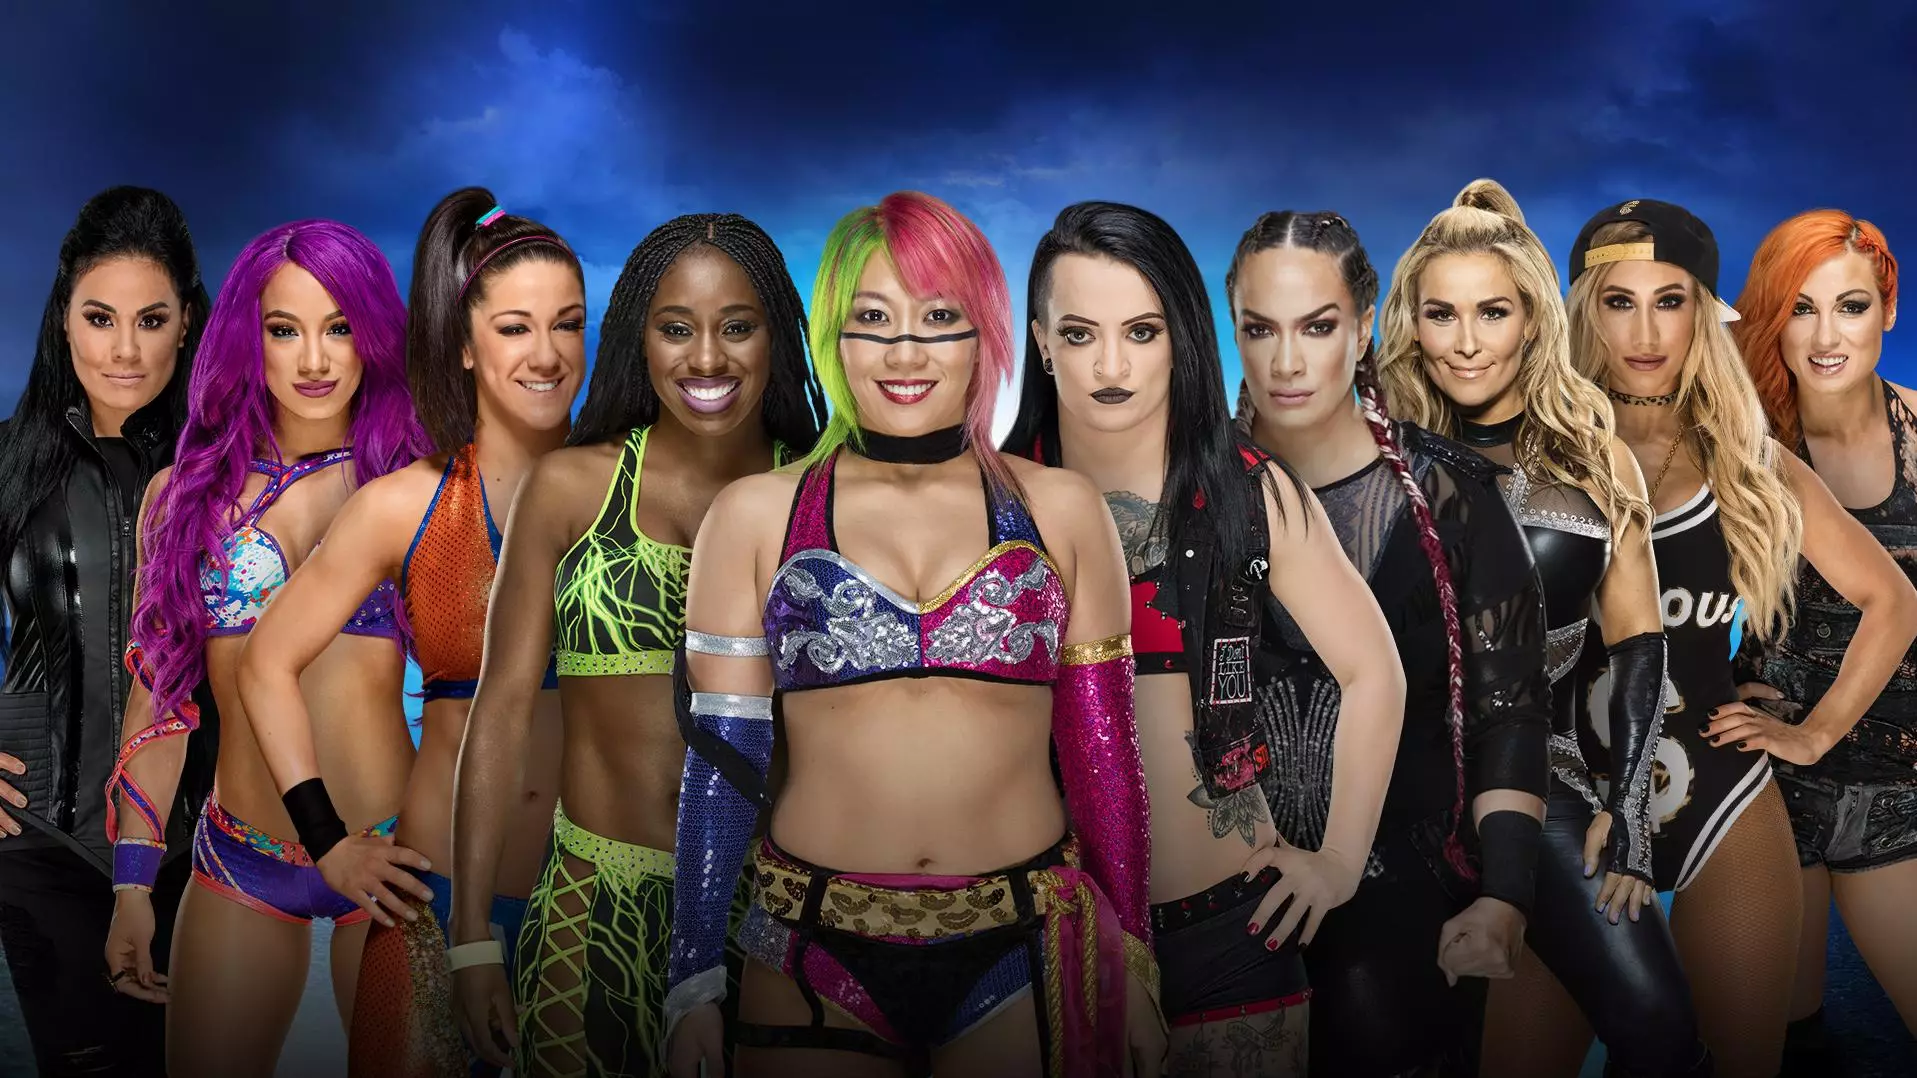 Rumble, Women, Rumble: The WWE's Women's Revolution Is About To Go Over The Top